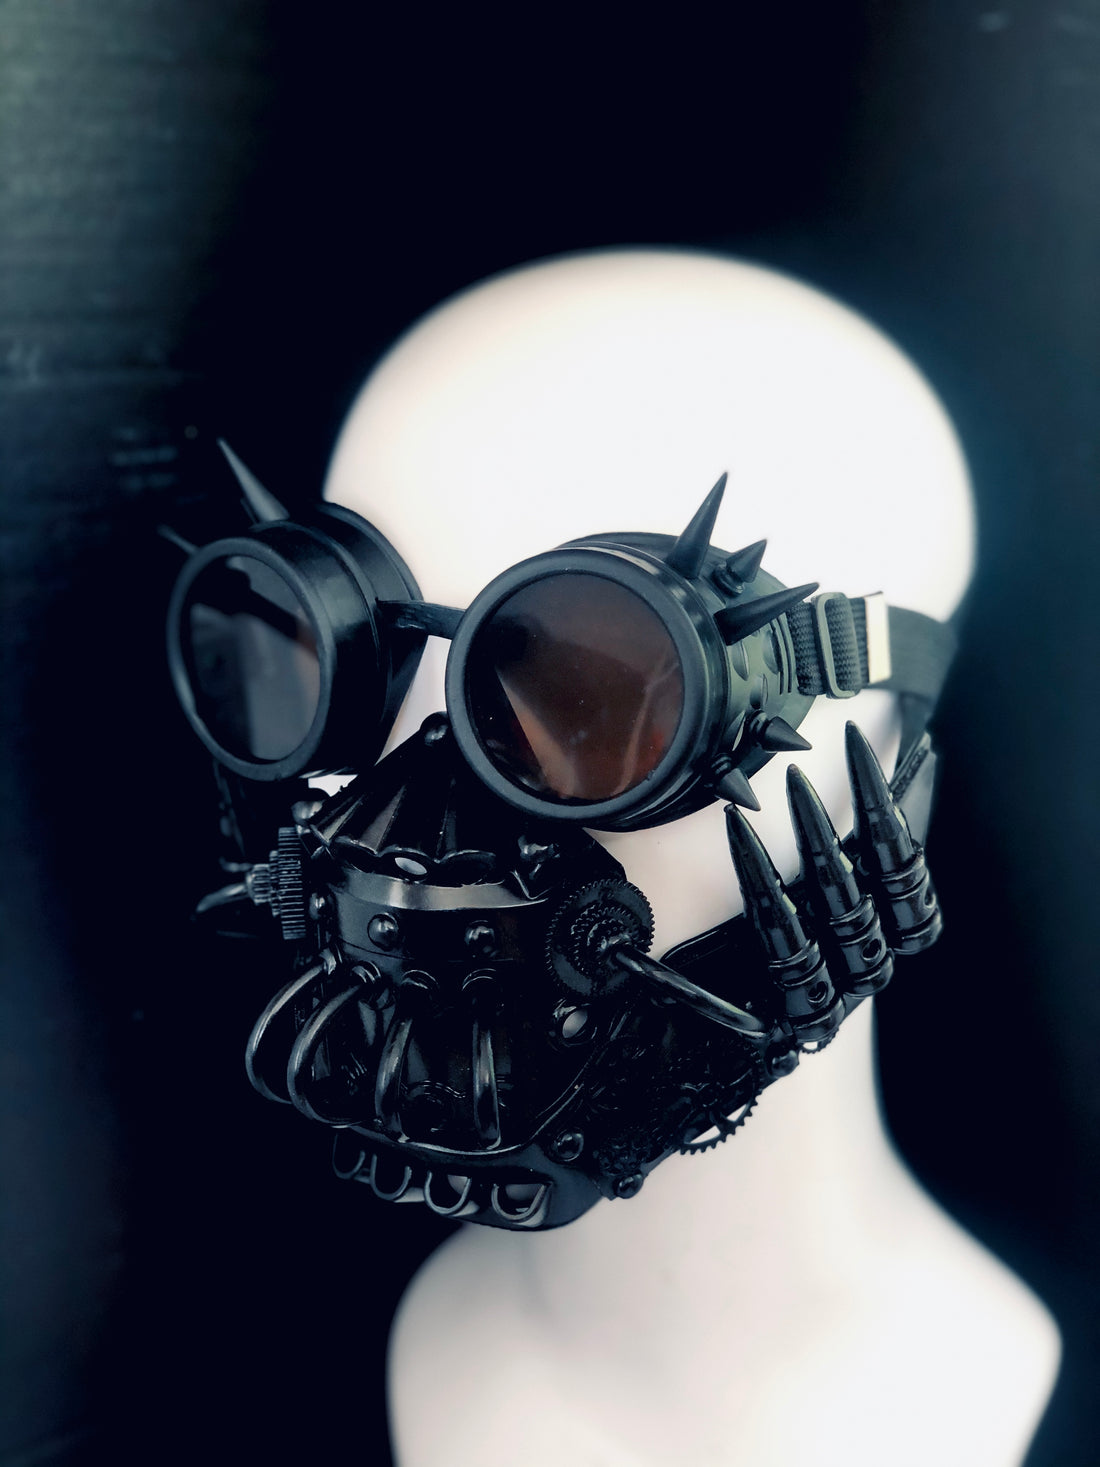 Steampunk respirator mouth guard with spike goggles in black for sale.